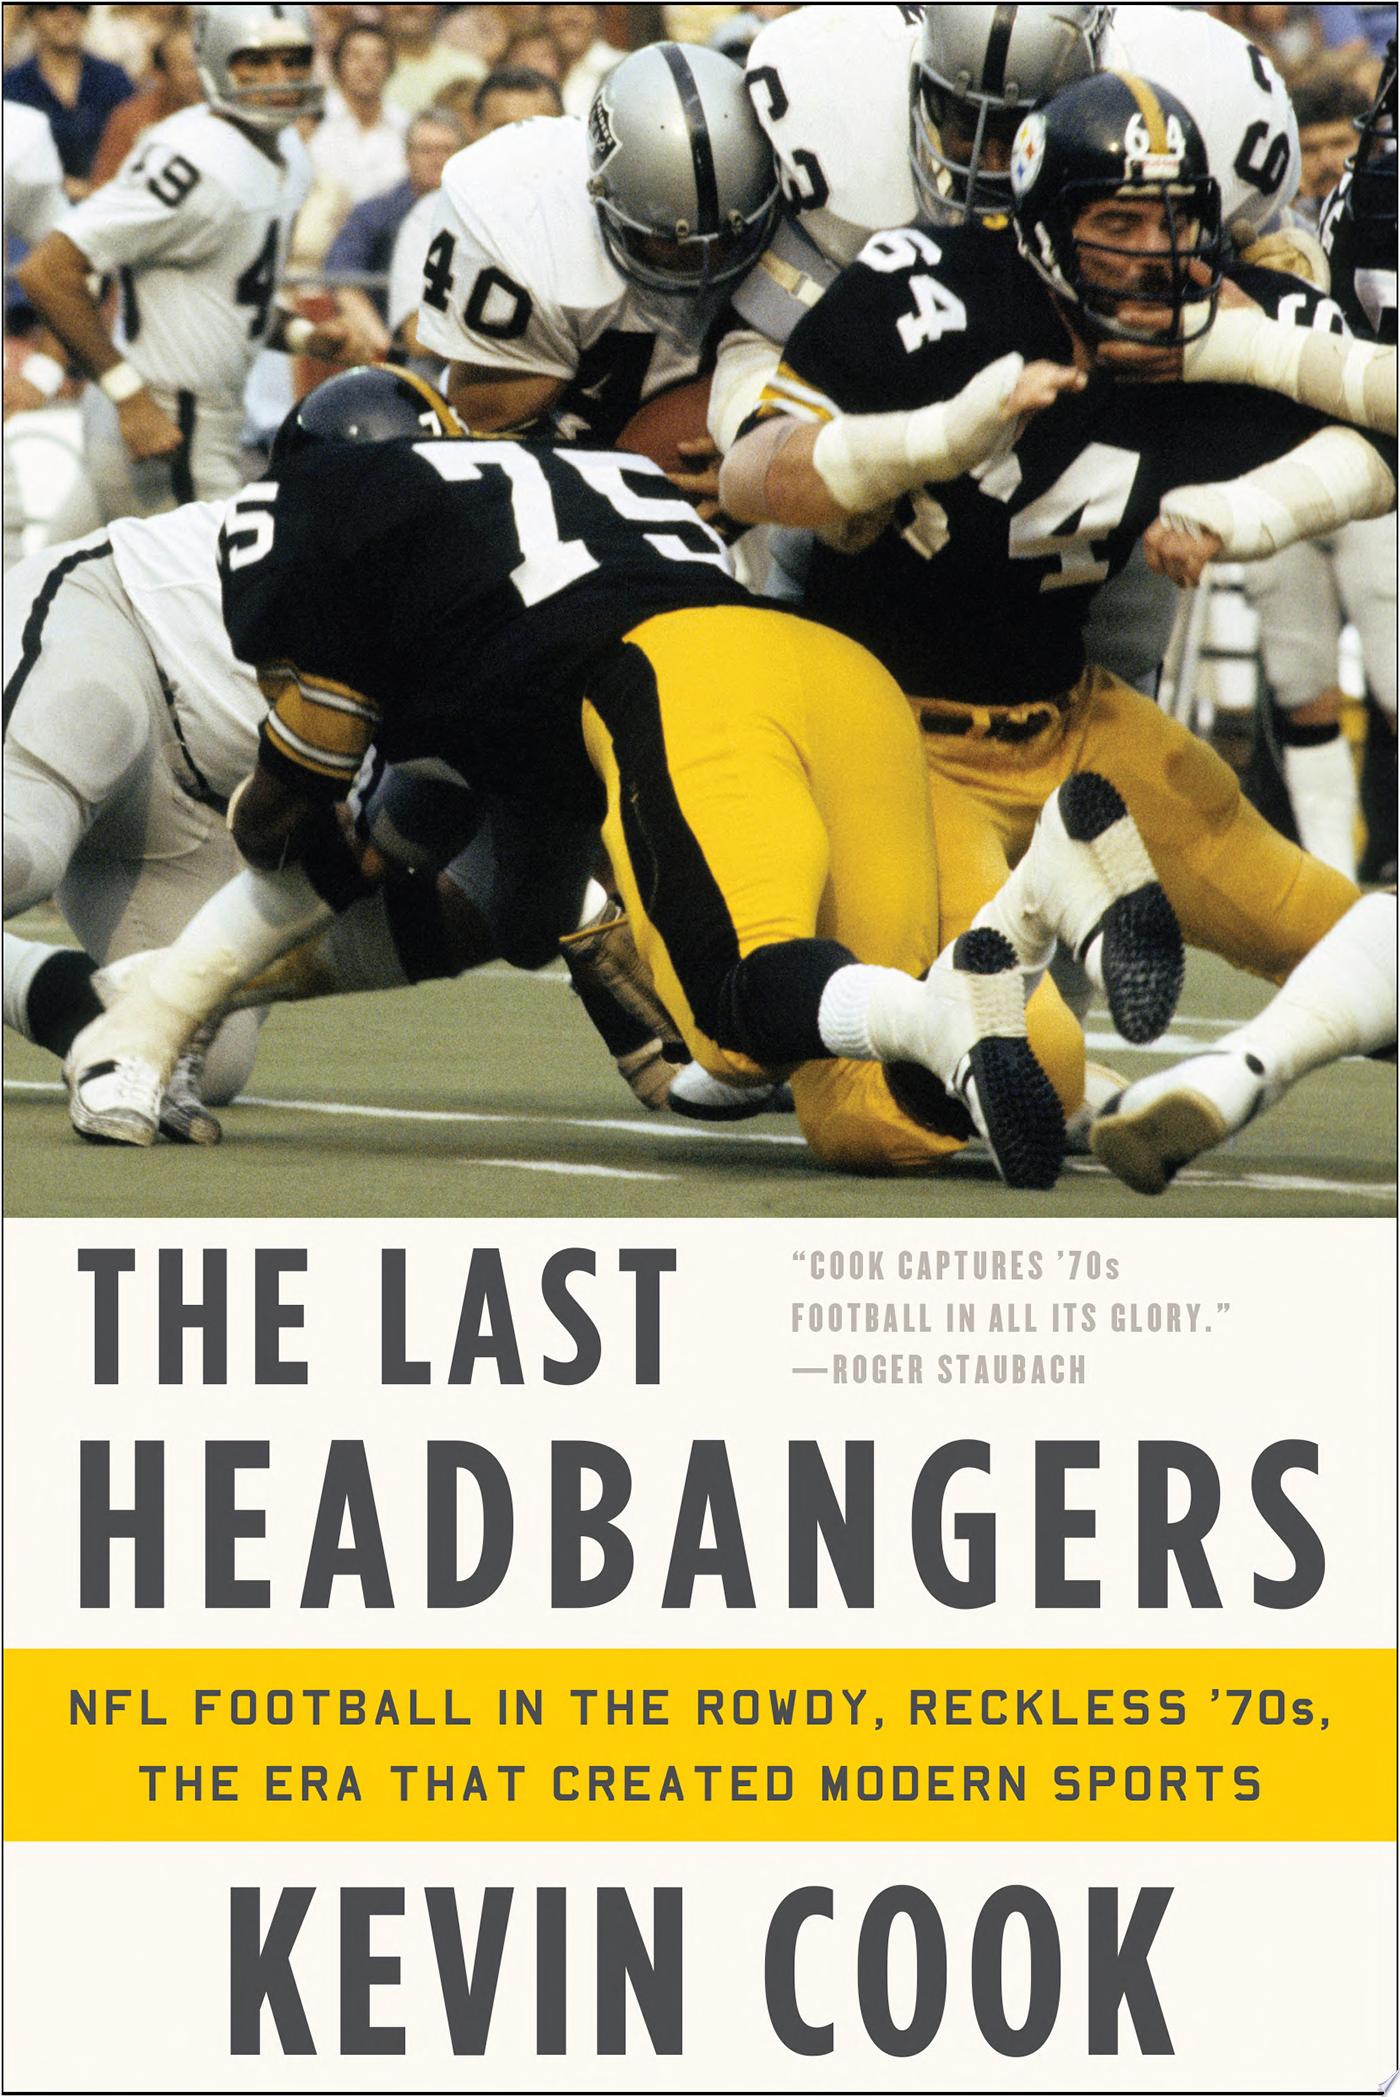 Image for "The Last Headbangers: NFL Football in the Rowdy, Reckless &#039;70s--The Era that Created Modern Sports"